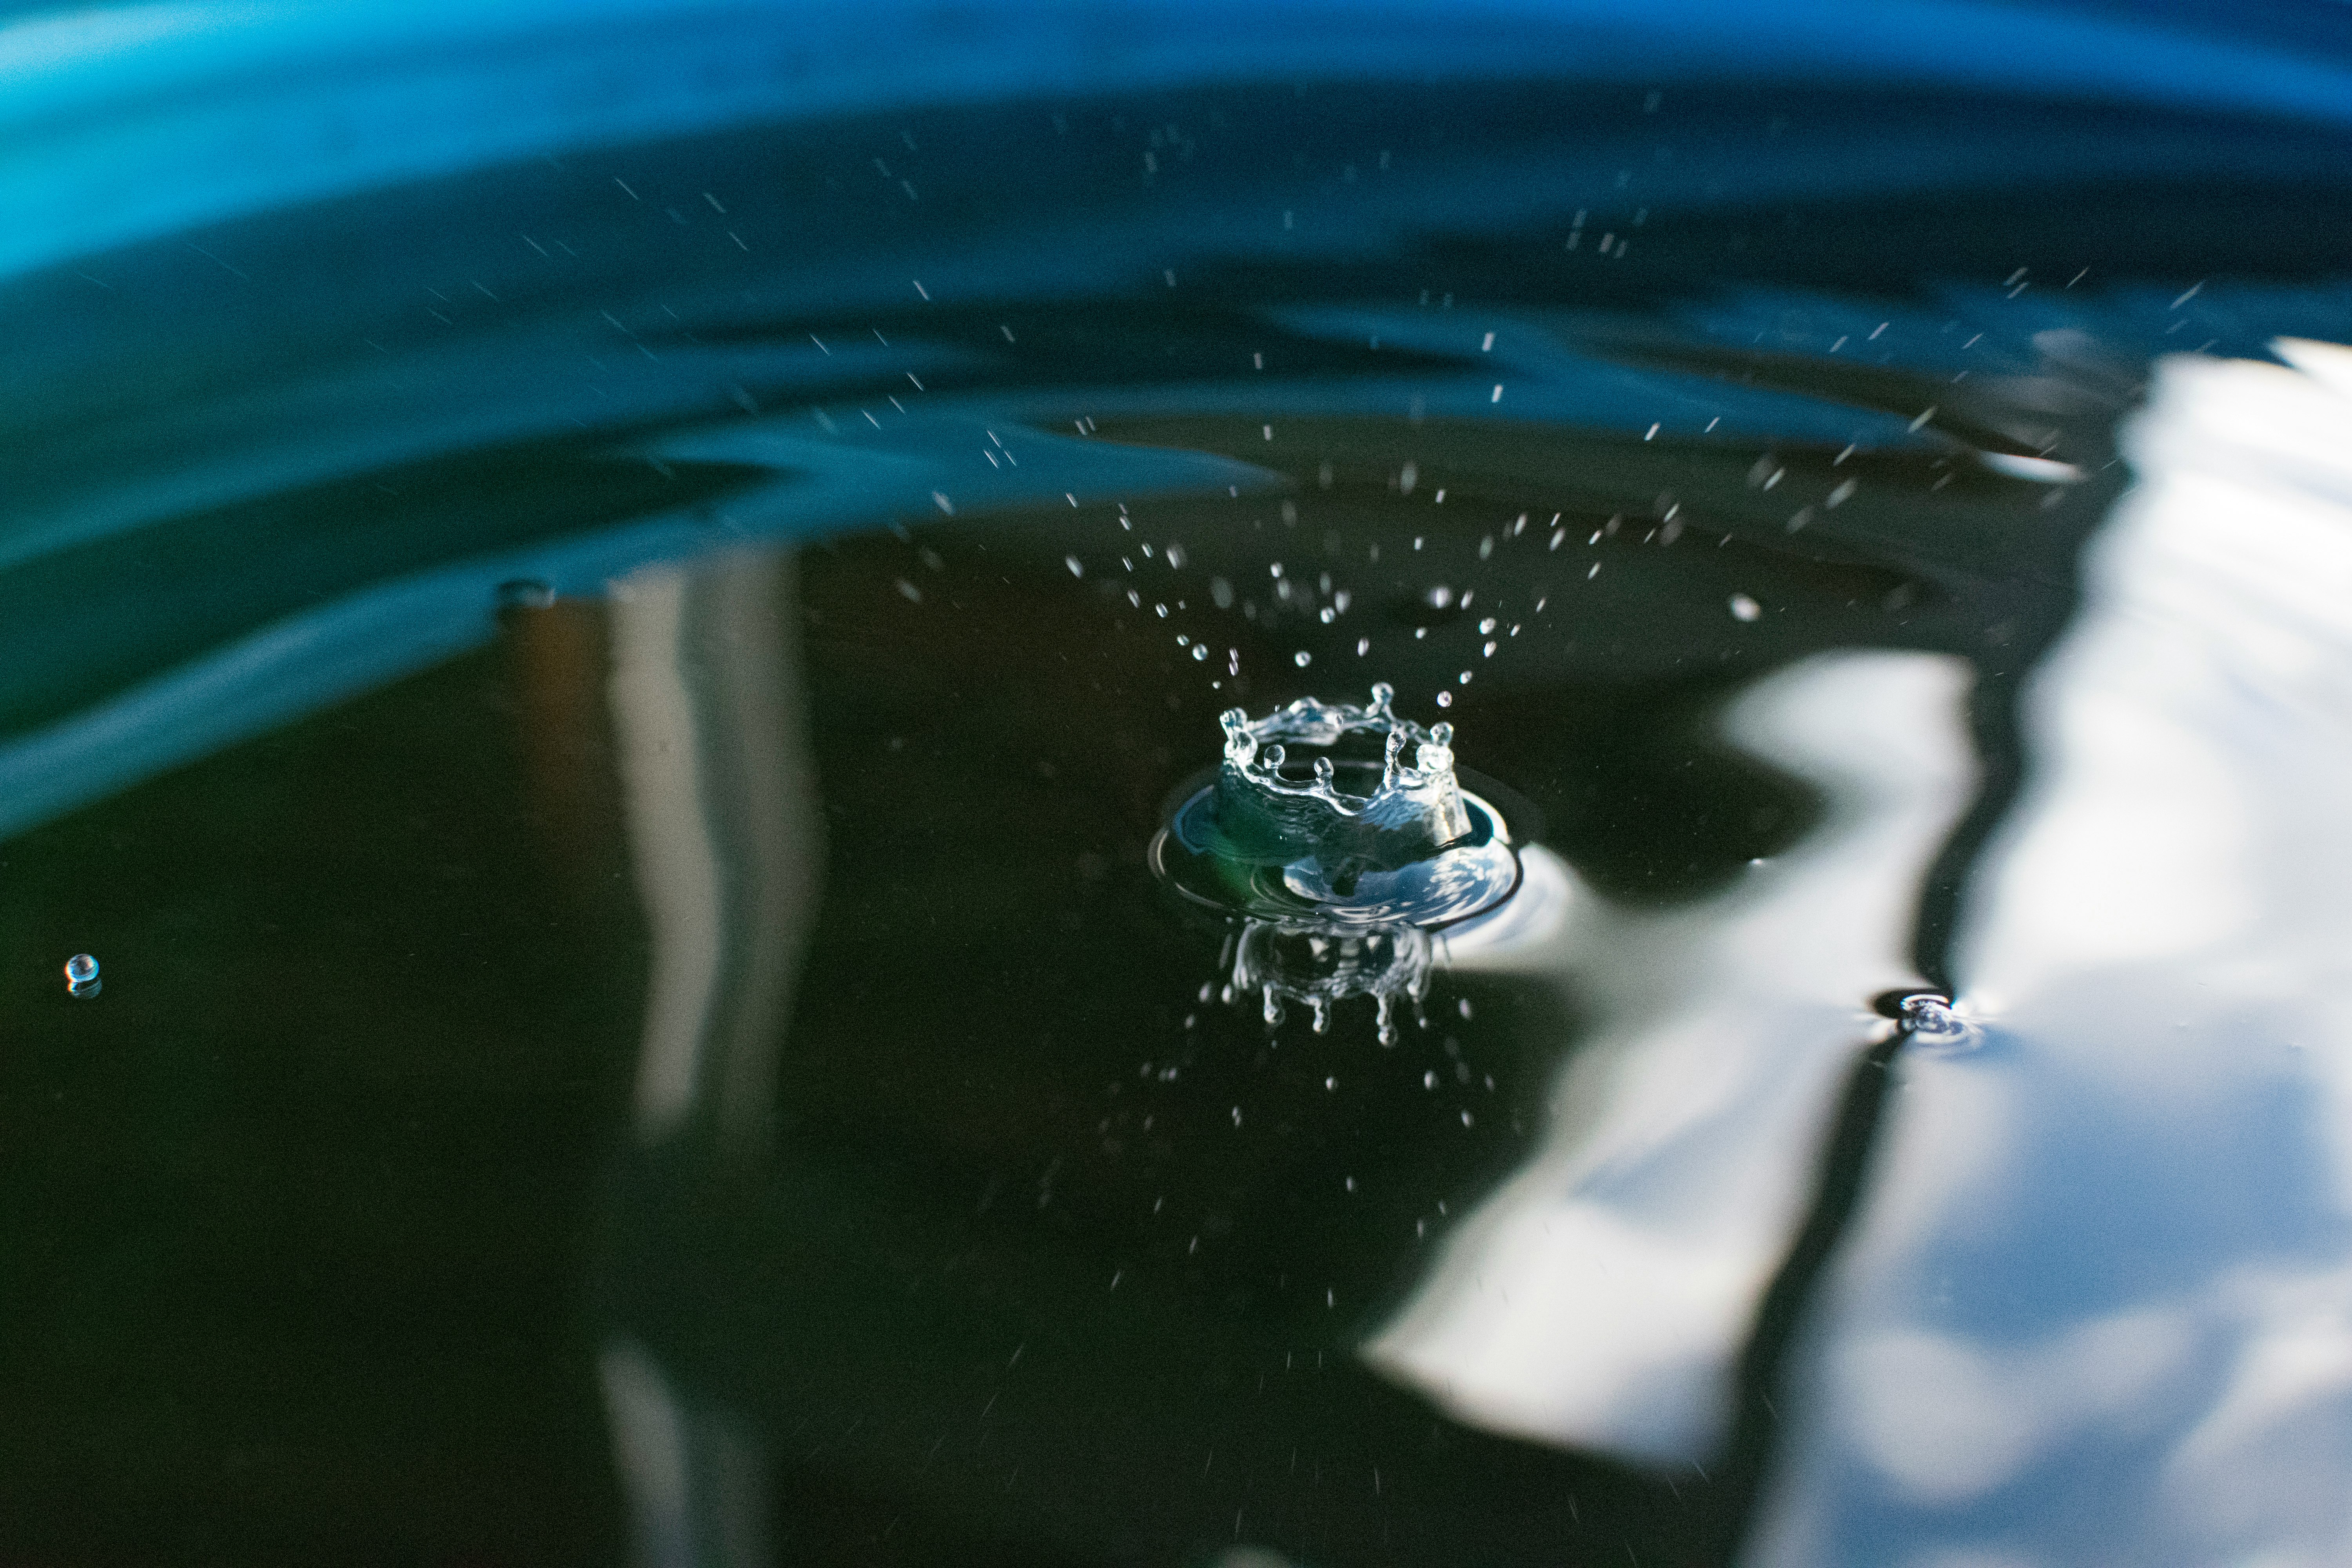 time-lapse photography of droplets on water